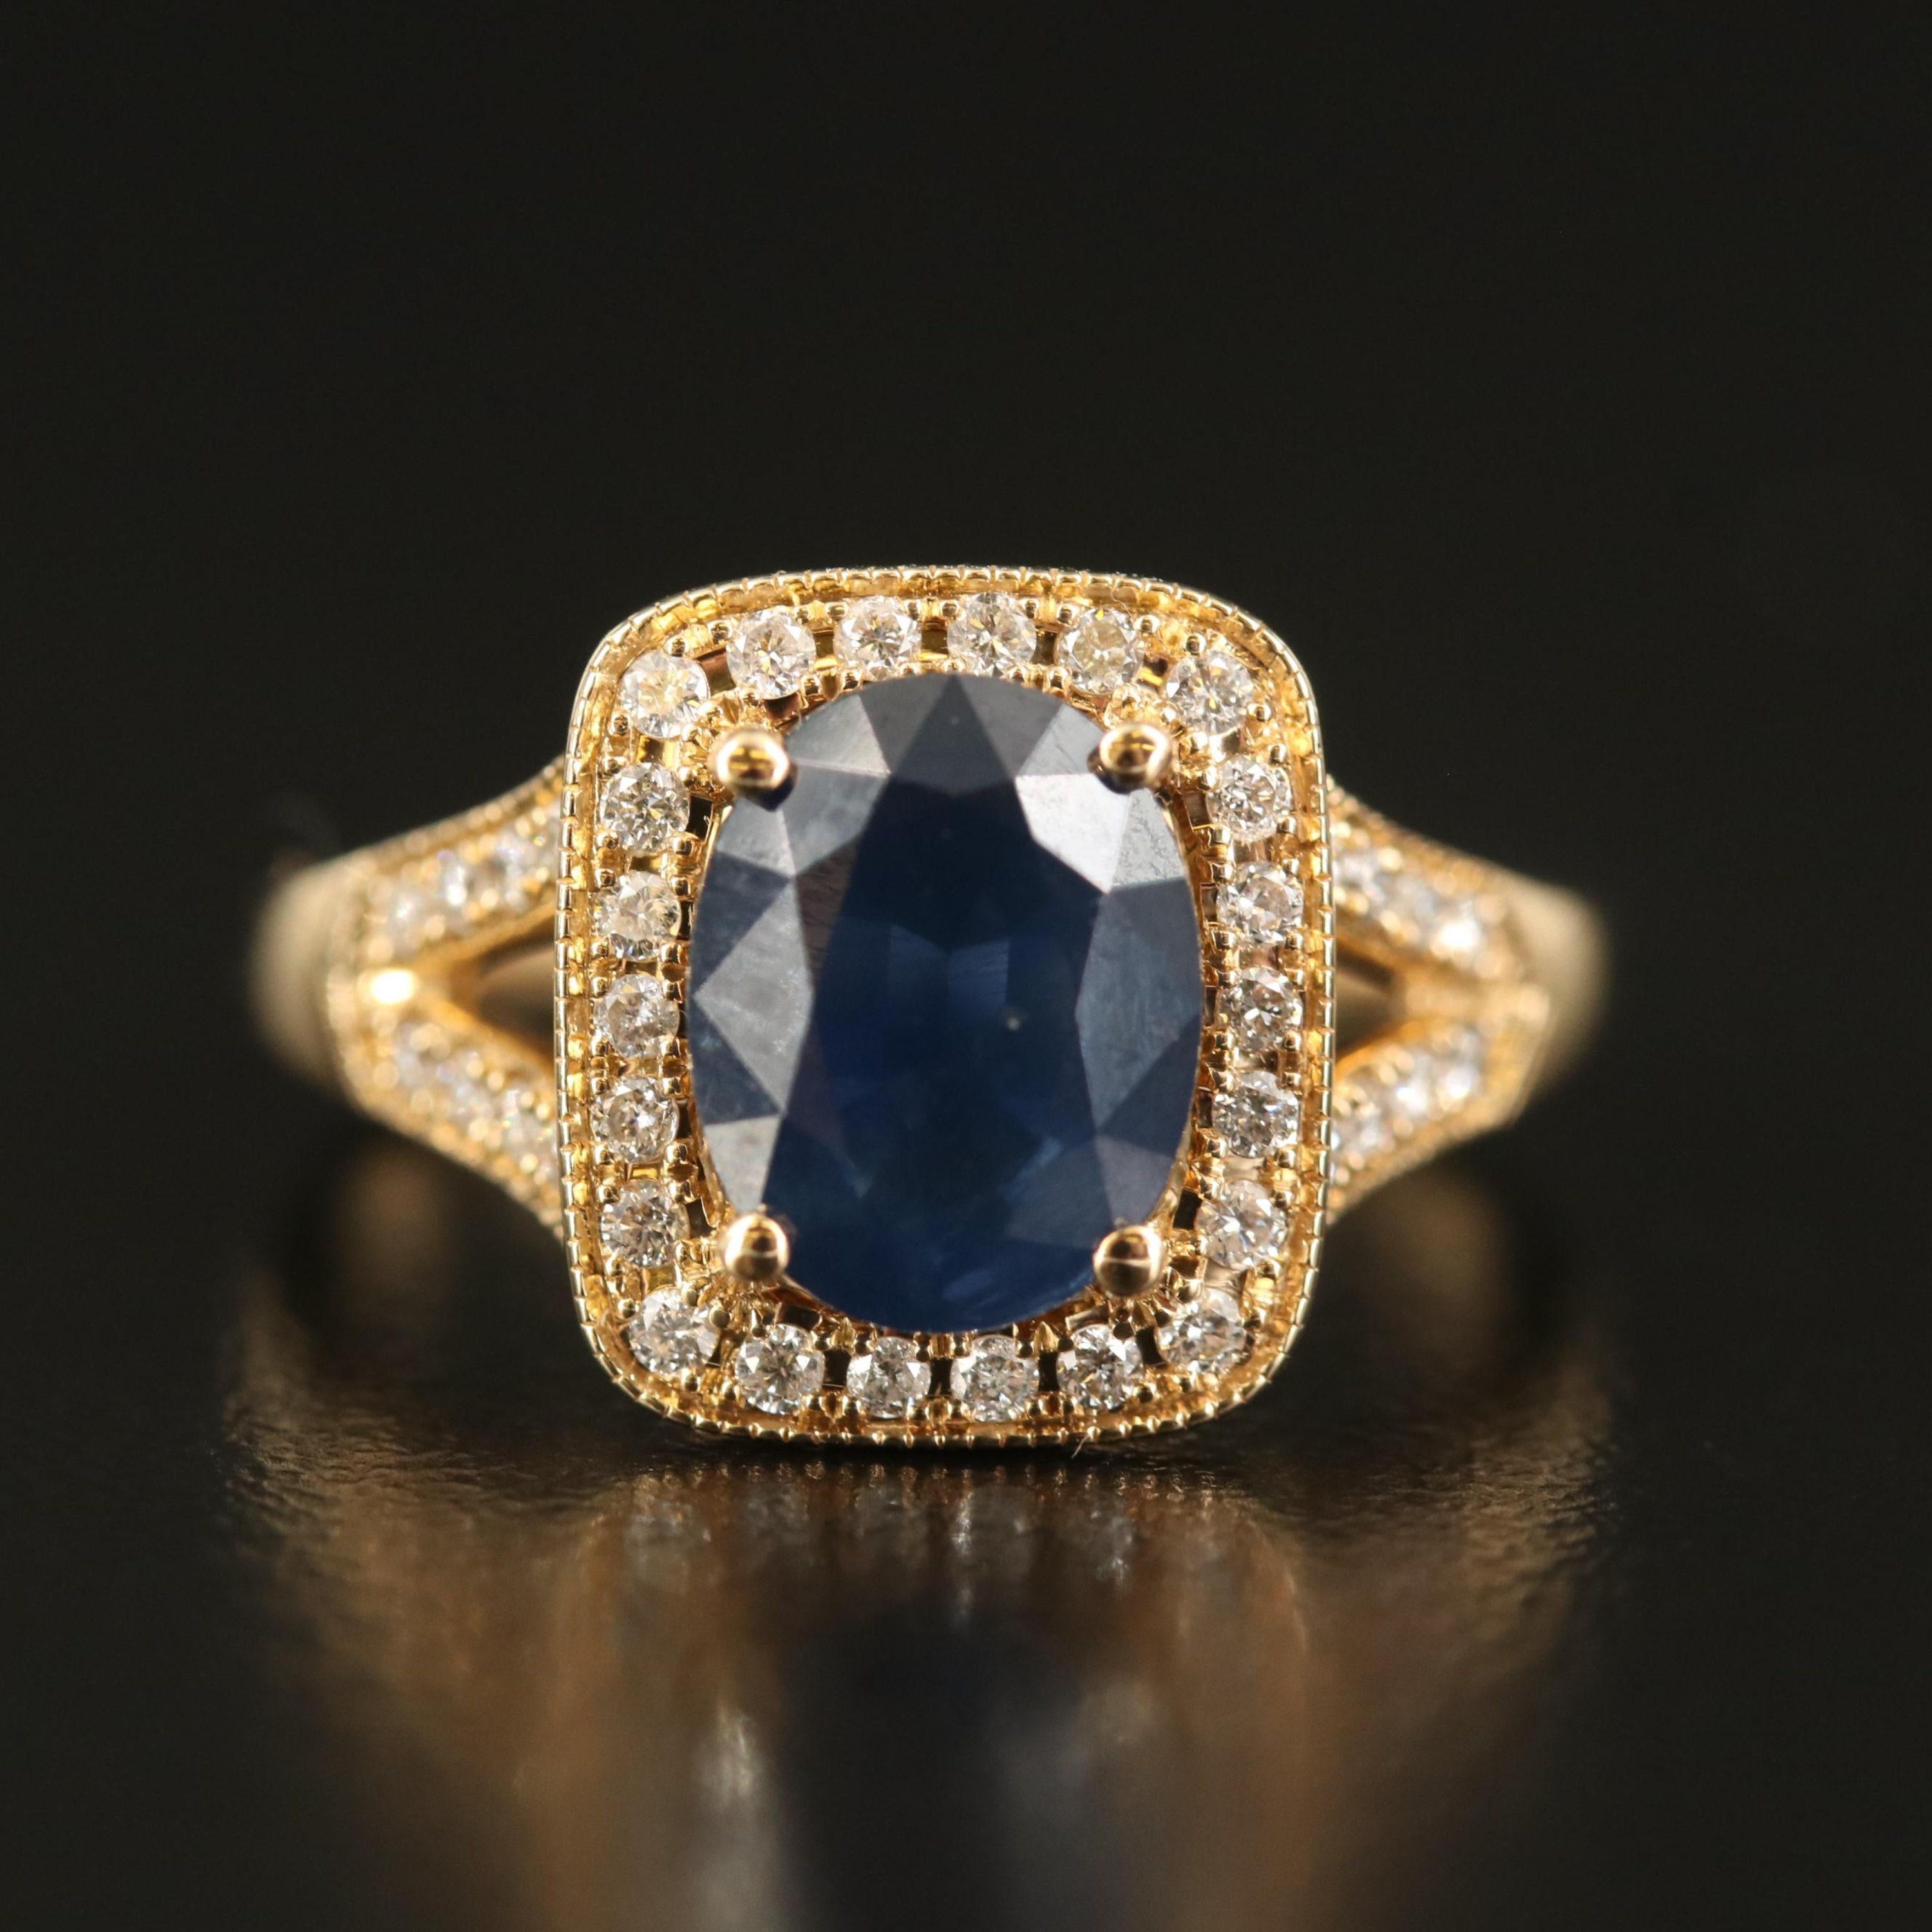 For Sale:  Antique Oval Cut Sapphire Engagement Ring Halo Vintage Diamond Wedding Ring 7